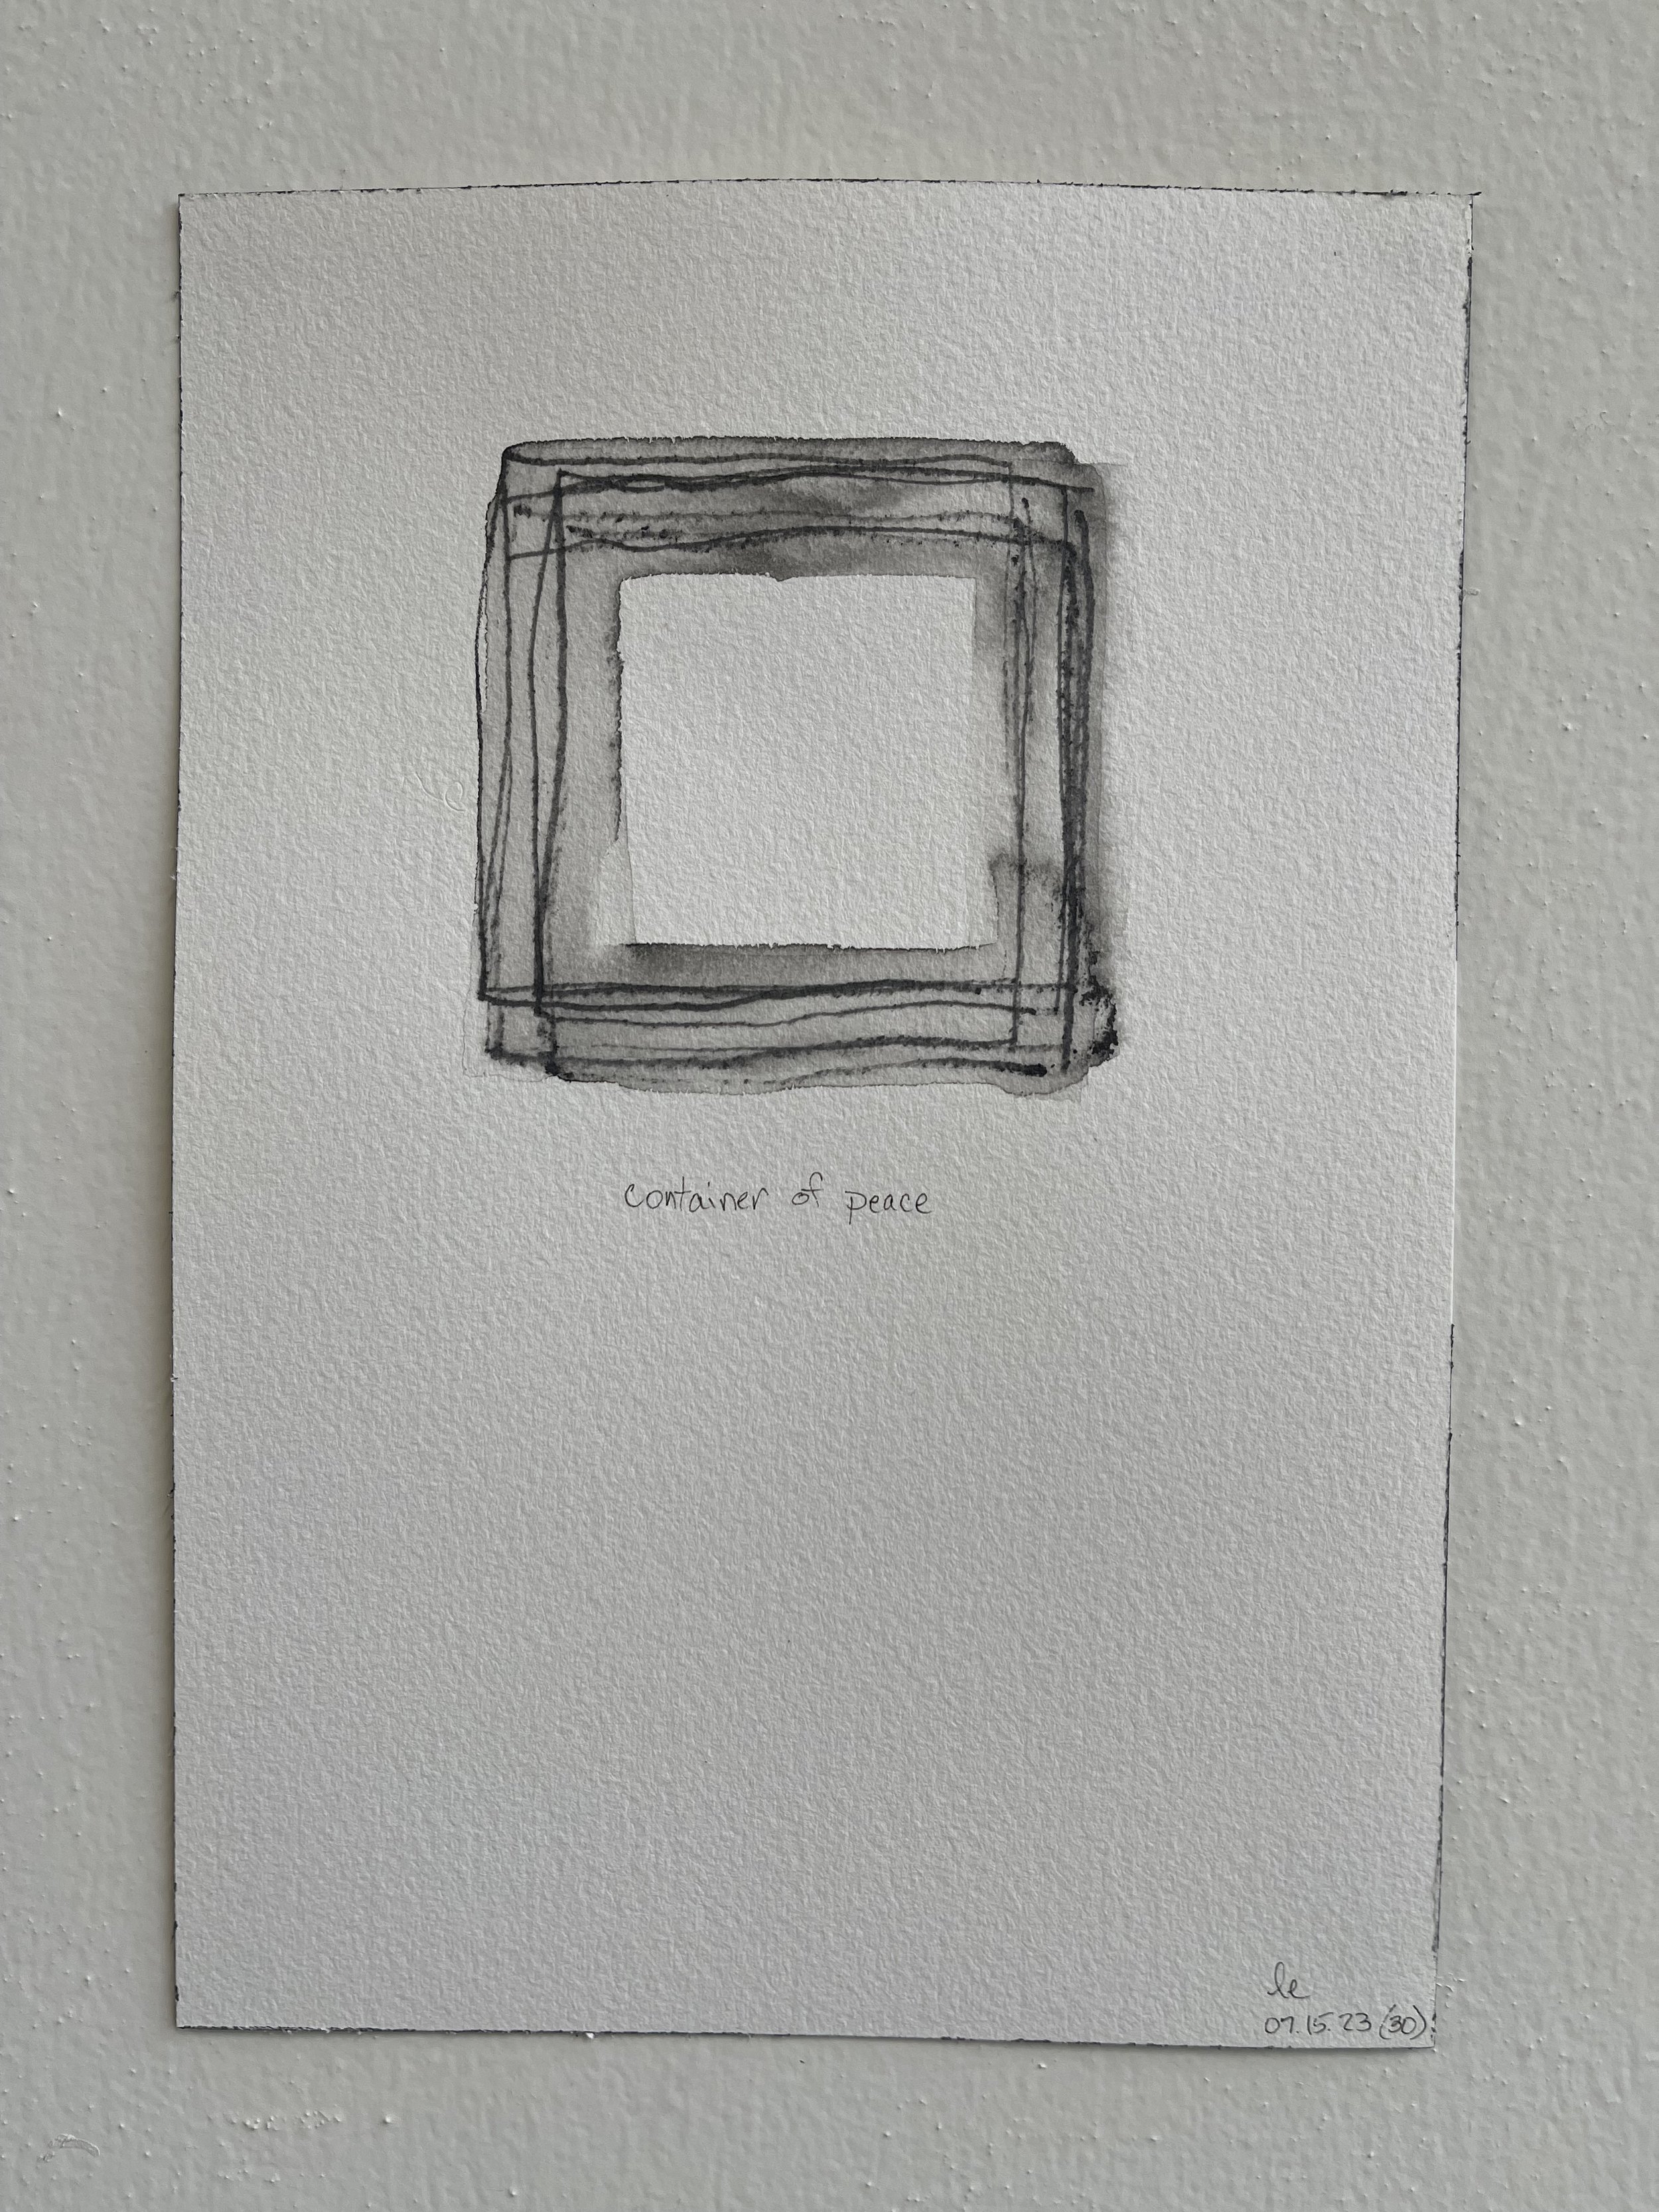 container of peace (30), 2023 | watercolor graphite on Arches paper | 7" x 10"